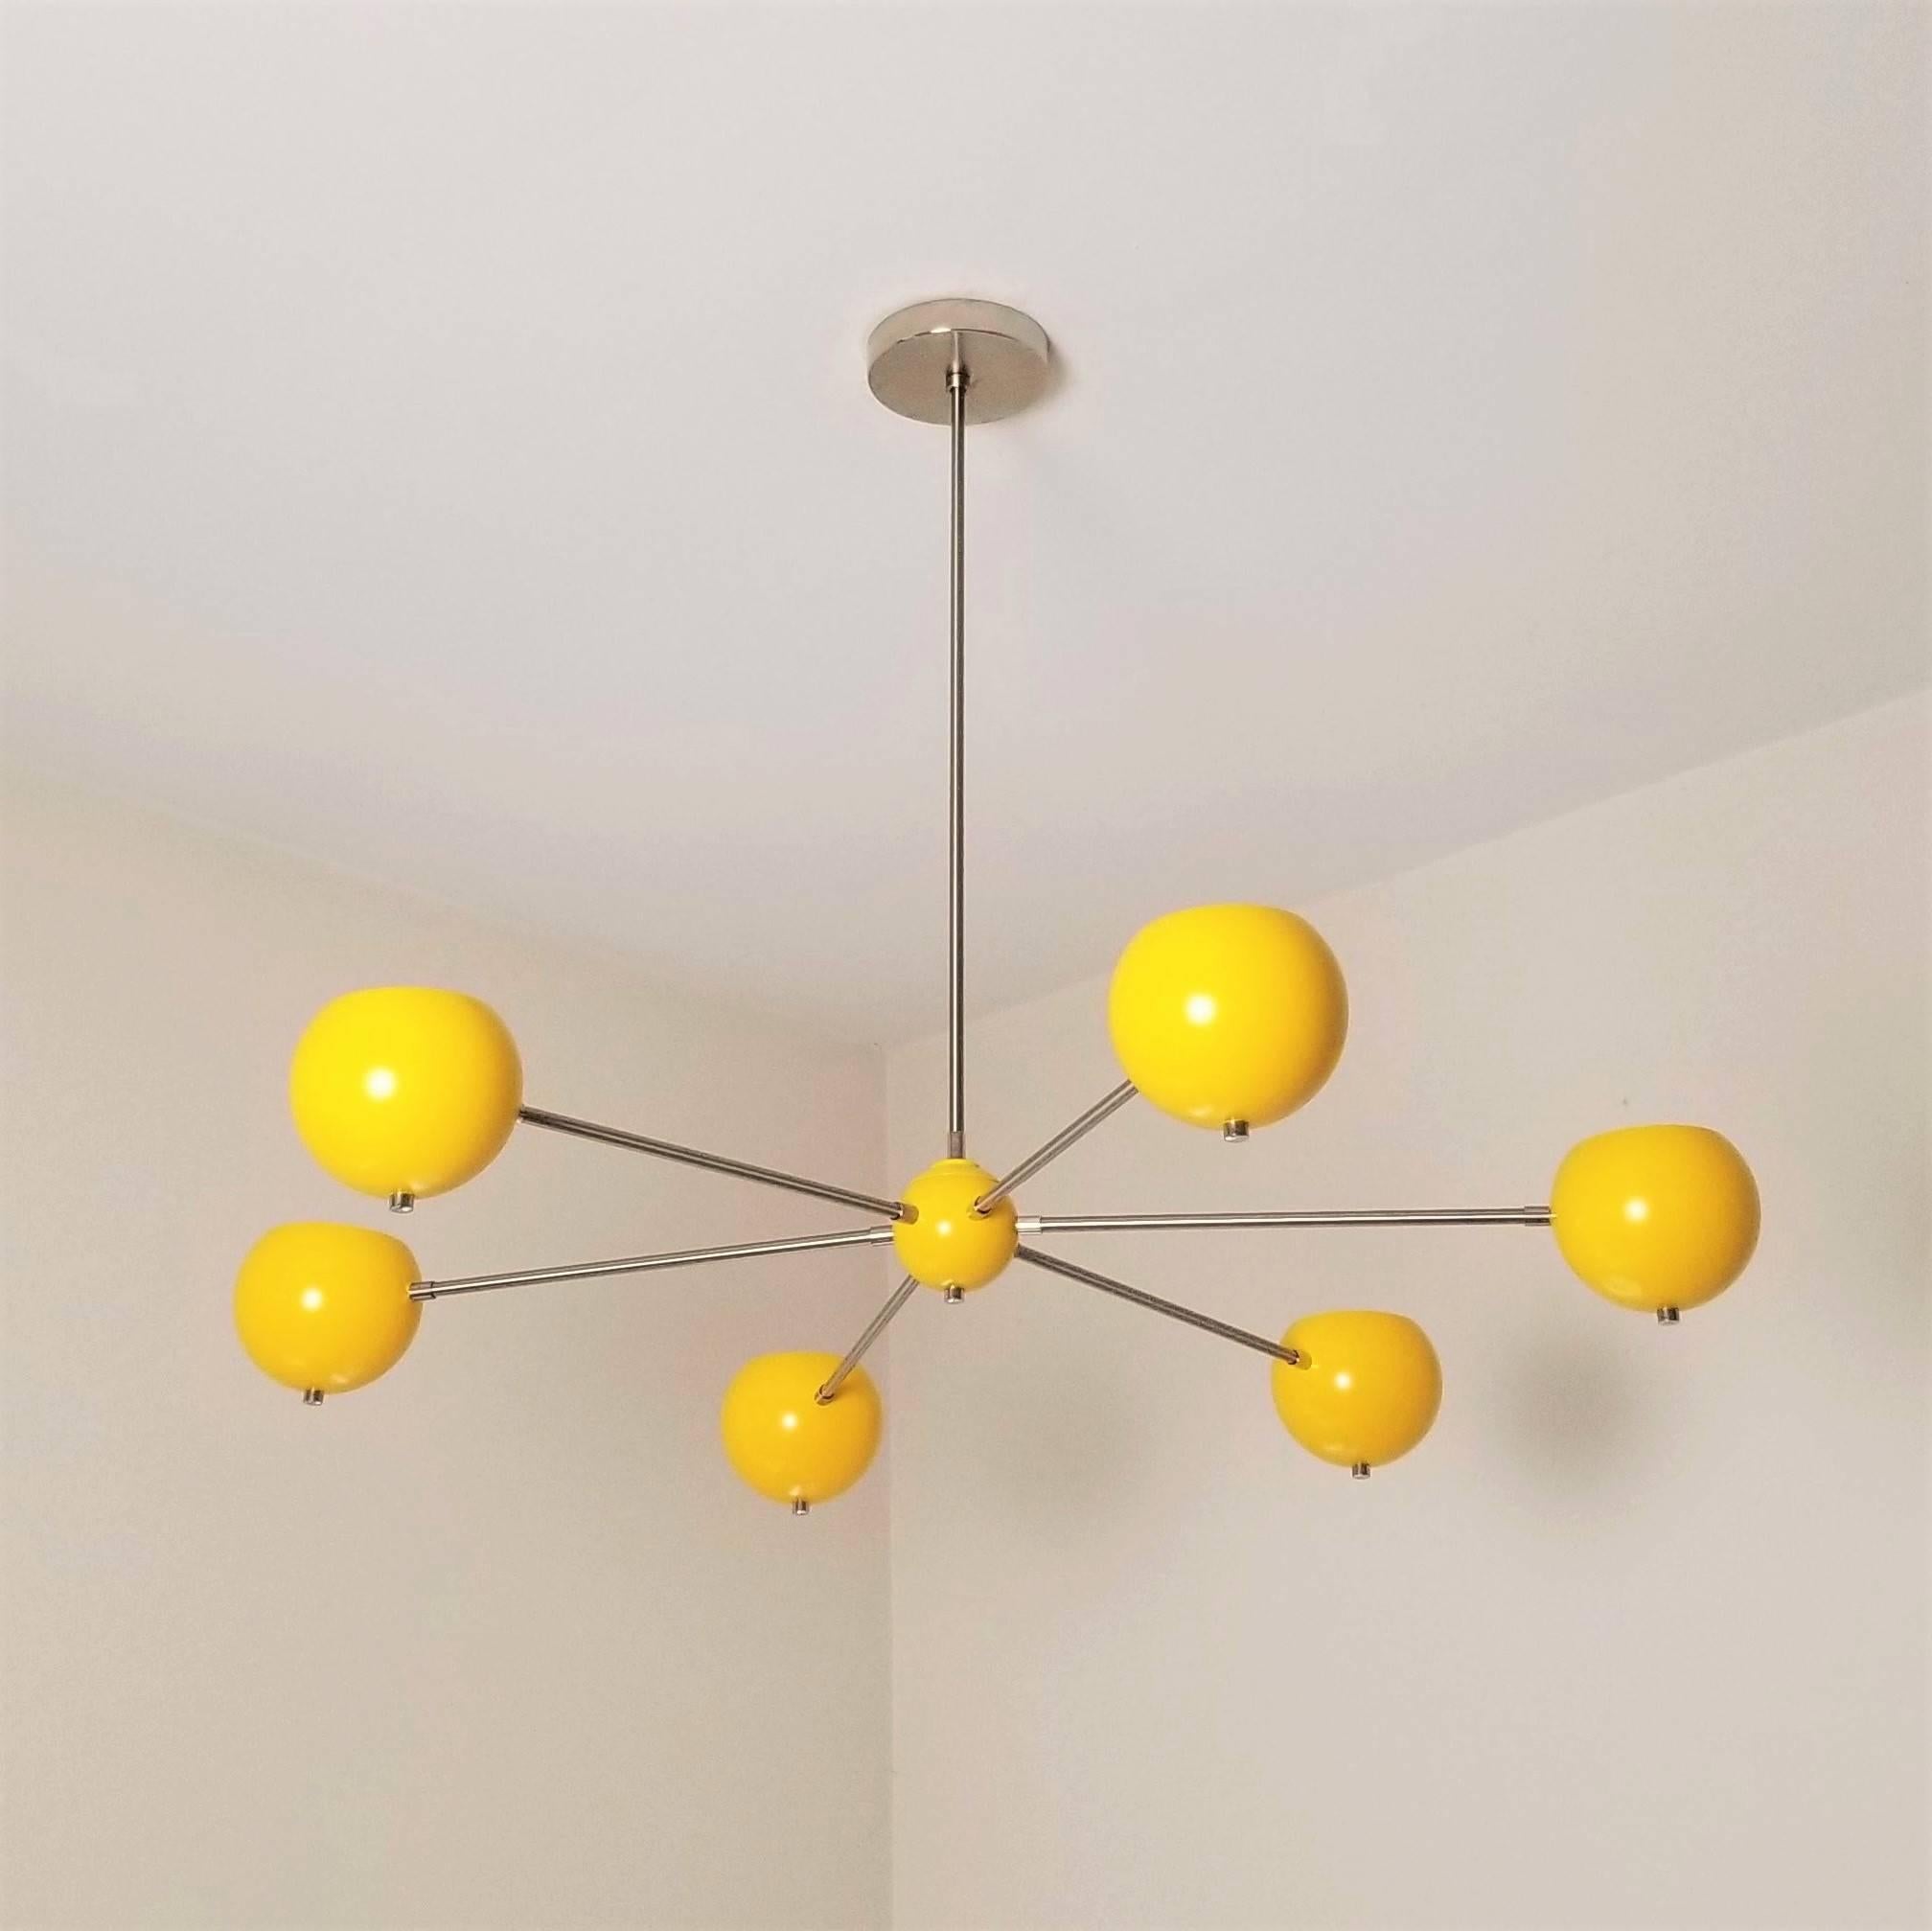 Our standard enamel colors are shown in the final images--there is no additional lead time or cost for these colors.

Introducing the model 320, a chic, simple brass chandelier with spun aluminium orbs shown in our 'Sunrise' enamel by Blueprint